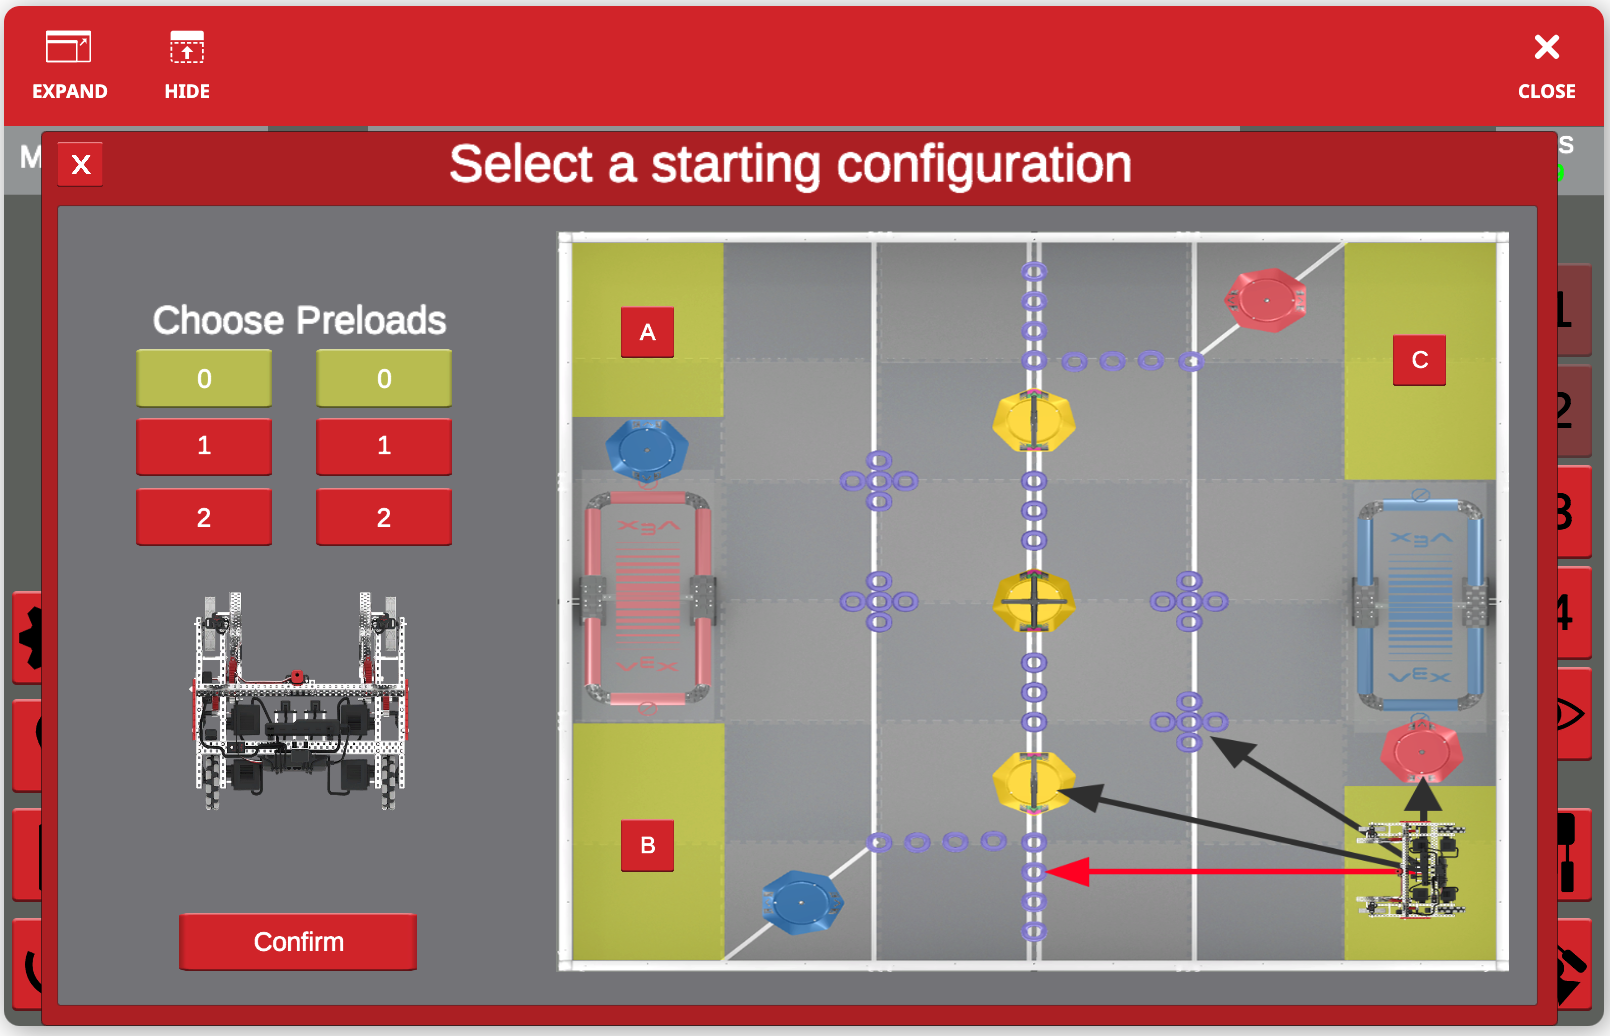 Image of the starting configuration window with selections made